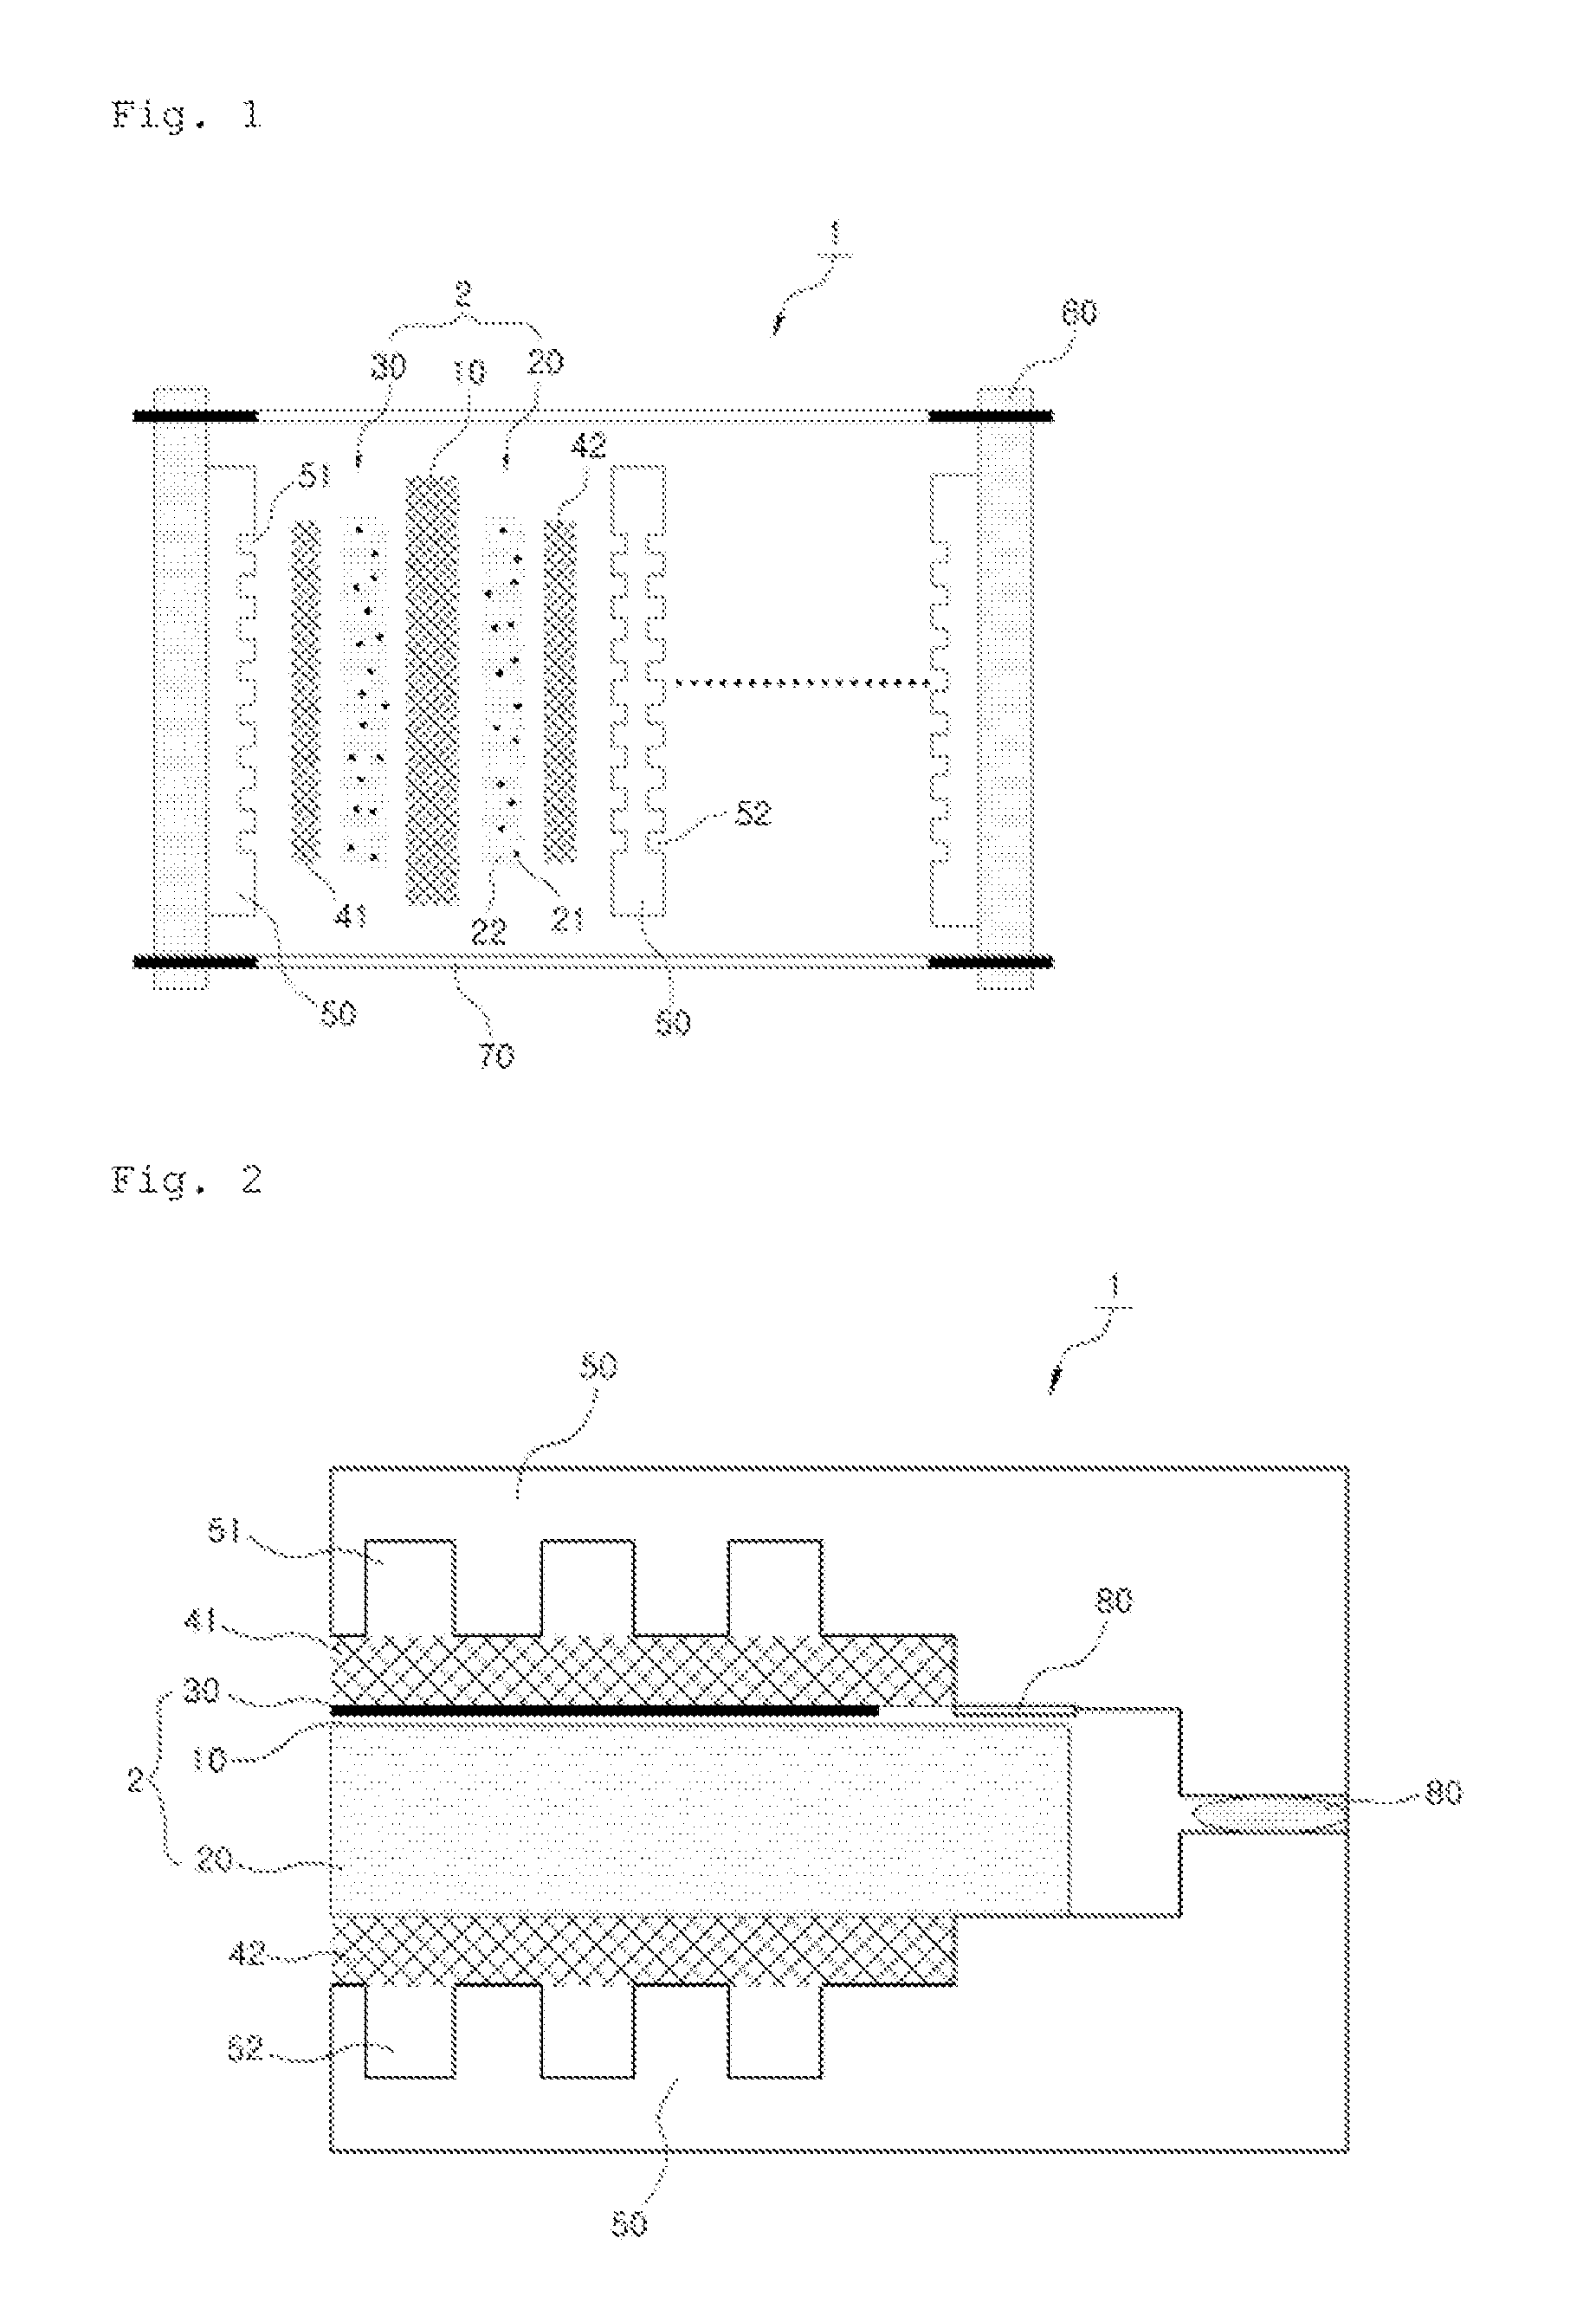 Combination Structure Between Single Cell and Interconnect of Solid Oxide Fuel Cell